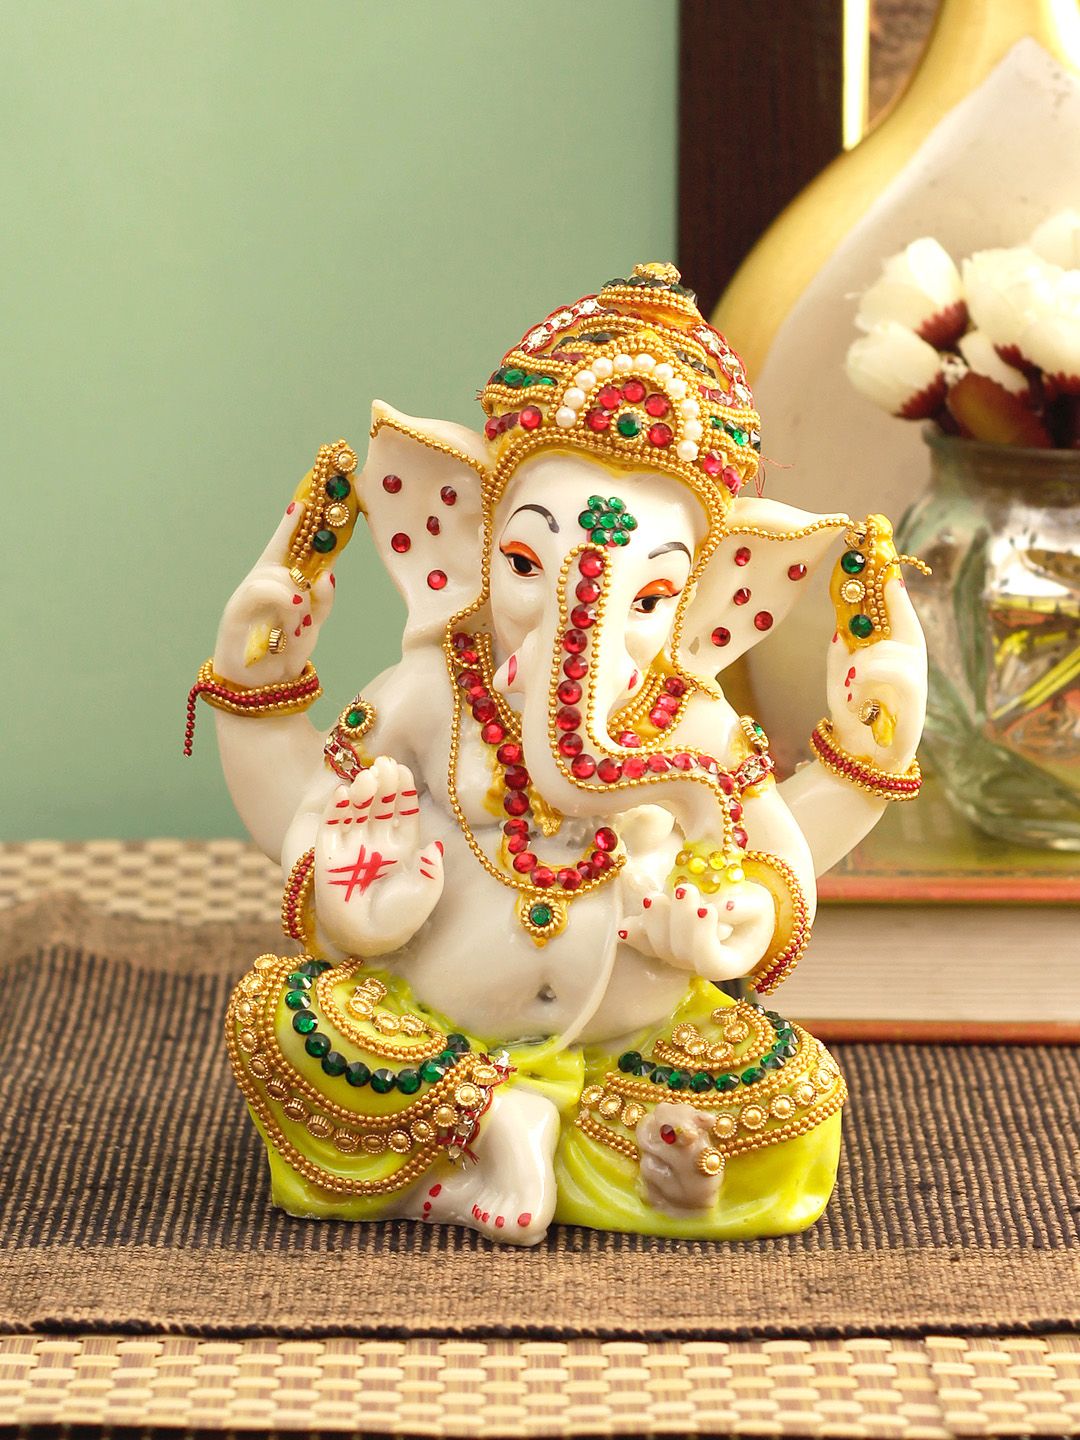 TIED RIBBONS Cream-Coloured & Green Ganesha Idol Sculpture Statue Figurine Price in India